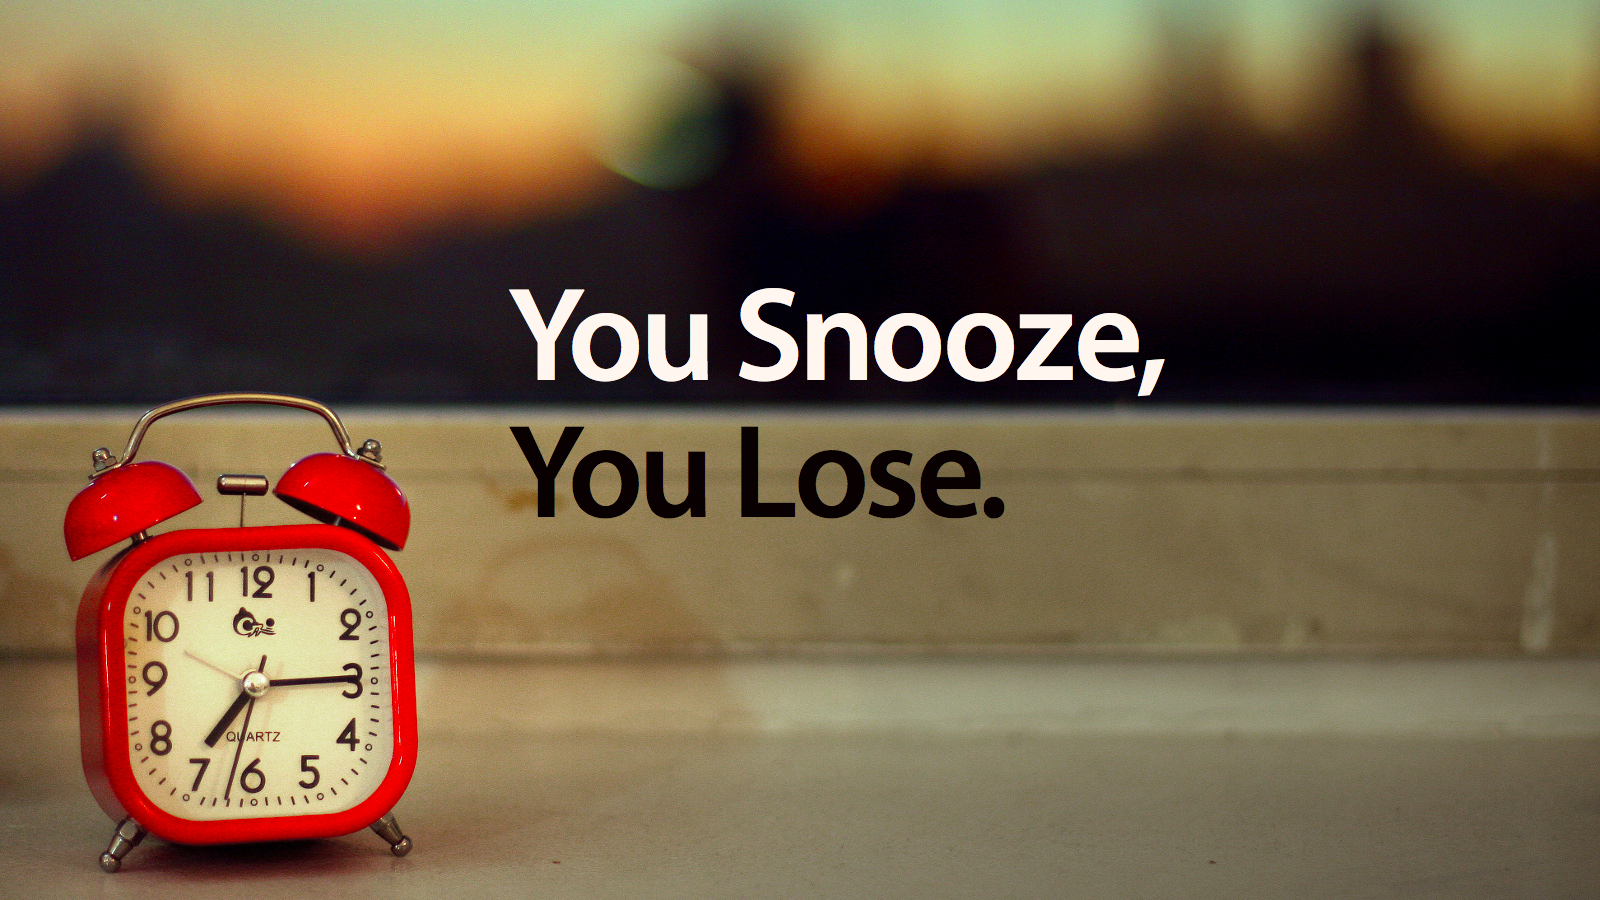 Author Alert: If You Snooze … You Lose